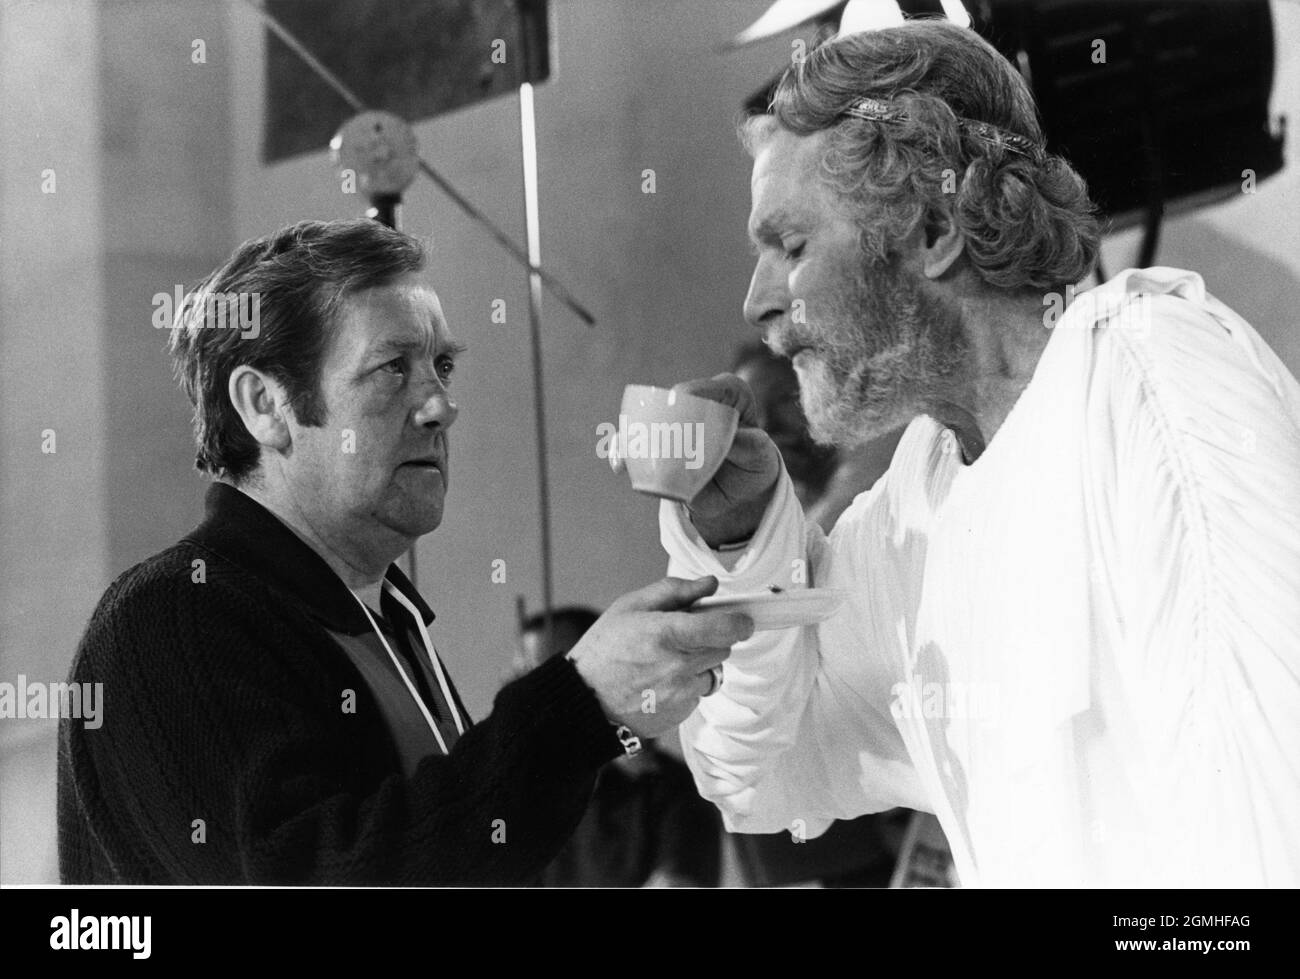 LAURENCE OLIVIER in costume as Zeus drinks a cup of tea assisted by a Crew Member on set candid during filming of CLASH OF THE TITANS 1981 director DESMOND DAVIS written by Beverley Cross costume design Emma Porteous creator of special visual effects (Dynamation) Ray Harryhausen music Laurence Rosenthal producers Charles H. Schneer and Ray Harryhausen Charles H. Schneer Productions / Peerford Ltd. / distribution Cinema International Corporation (CIC)  (UK) Metro Goldwyn Mayer (USA) Stock Photo